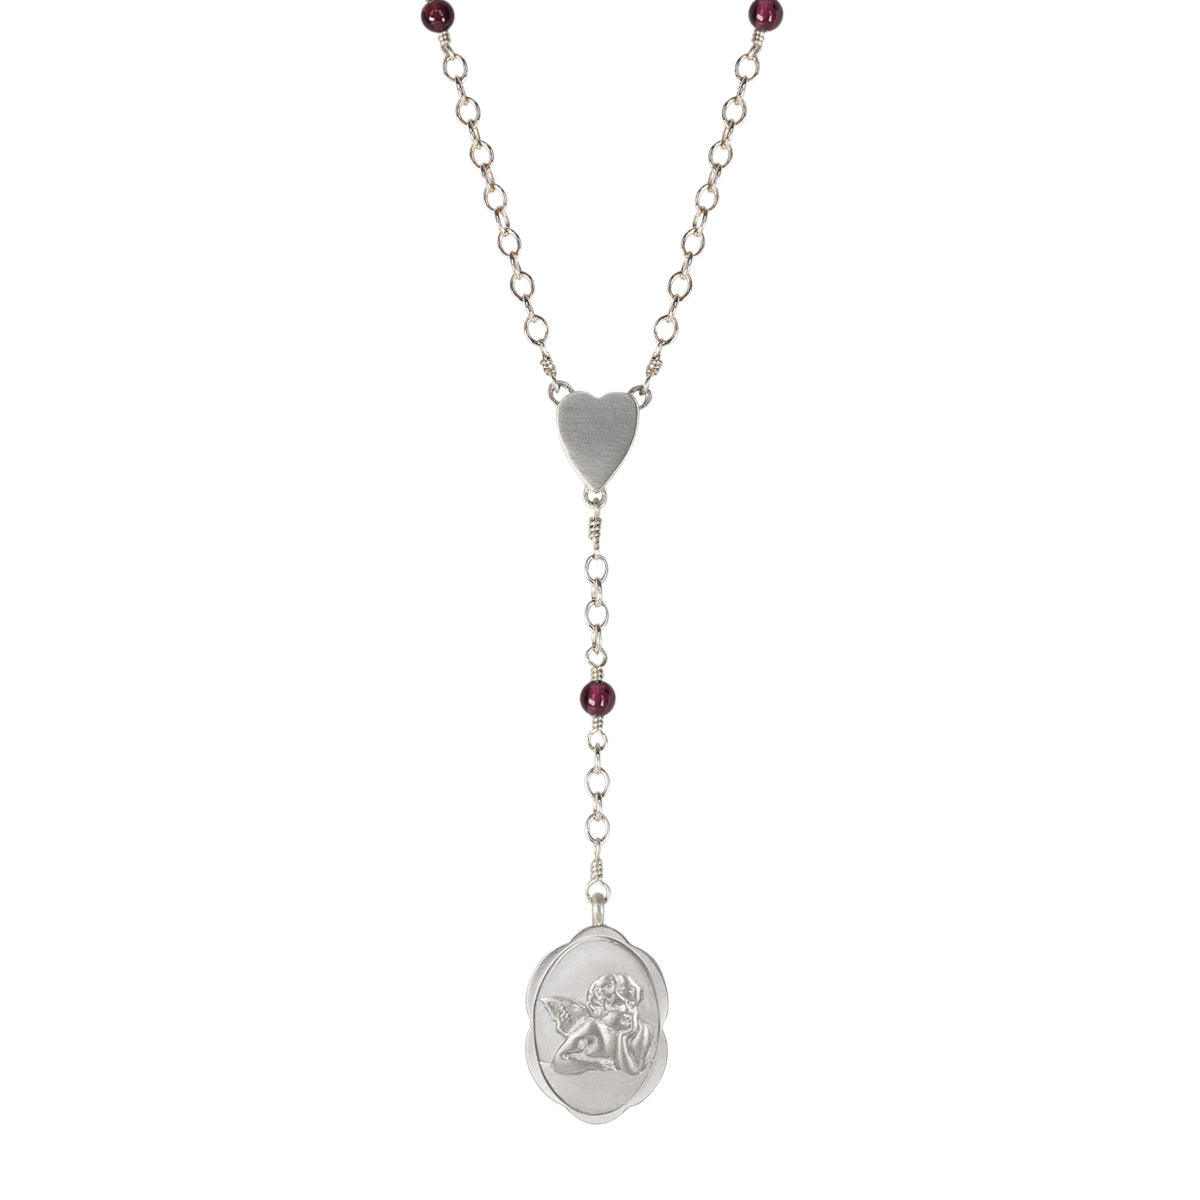 Sterling Silver Angel Rosary Necklace on Garnet Chain